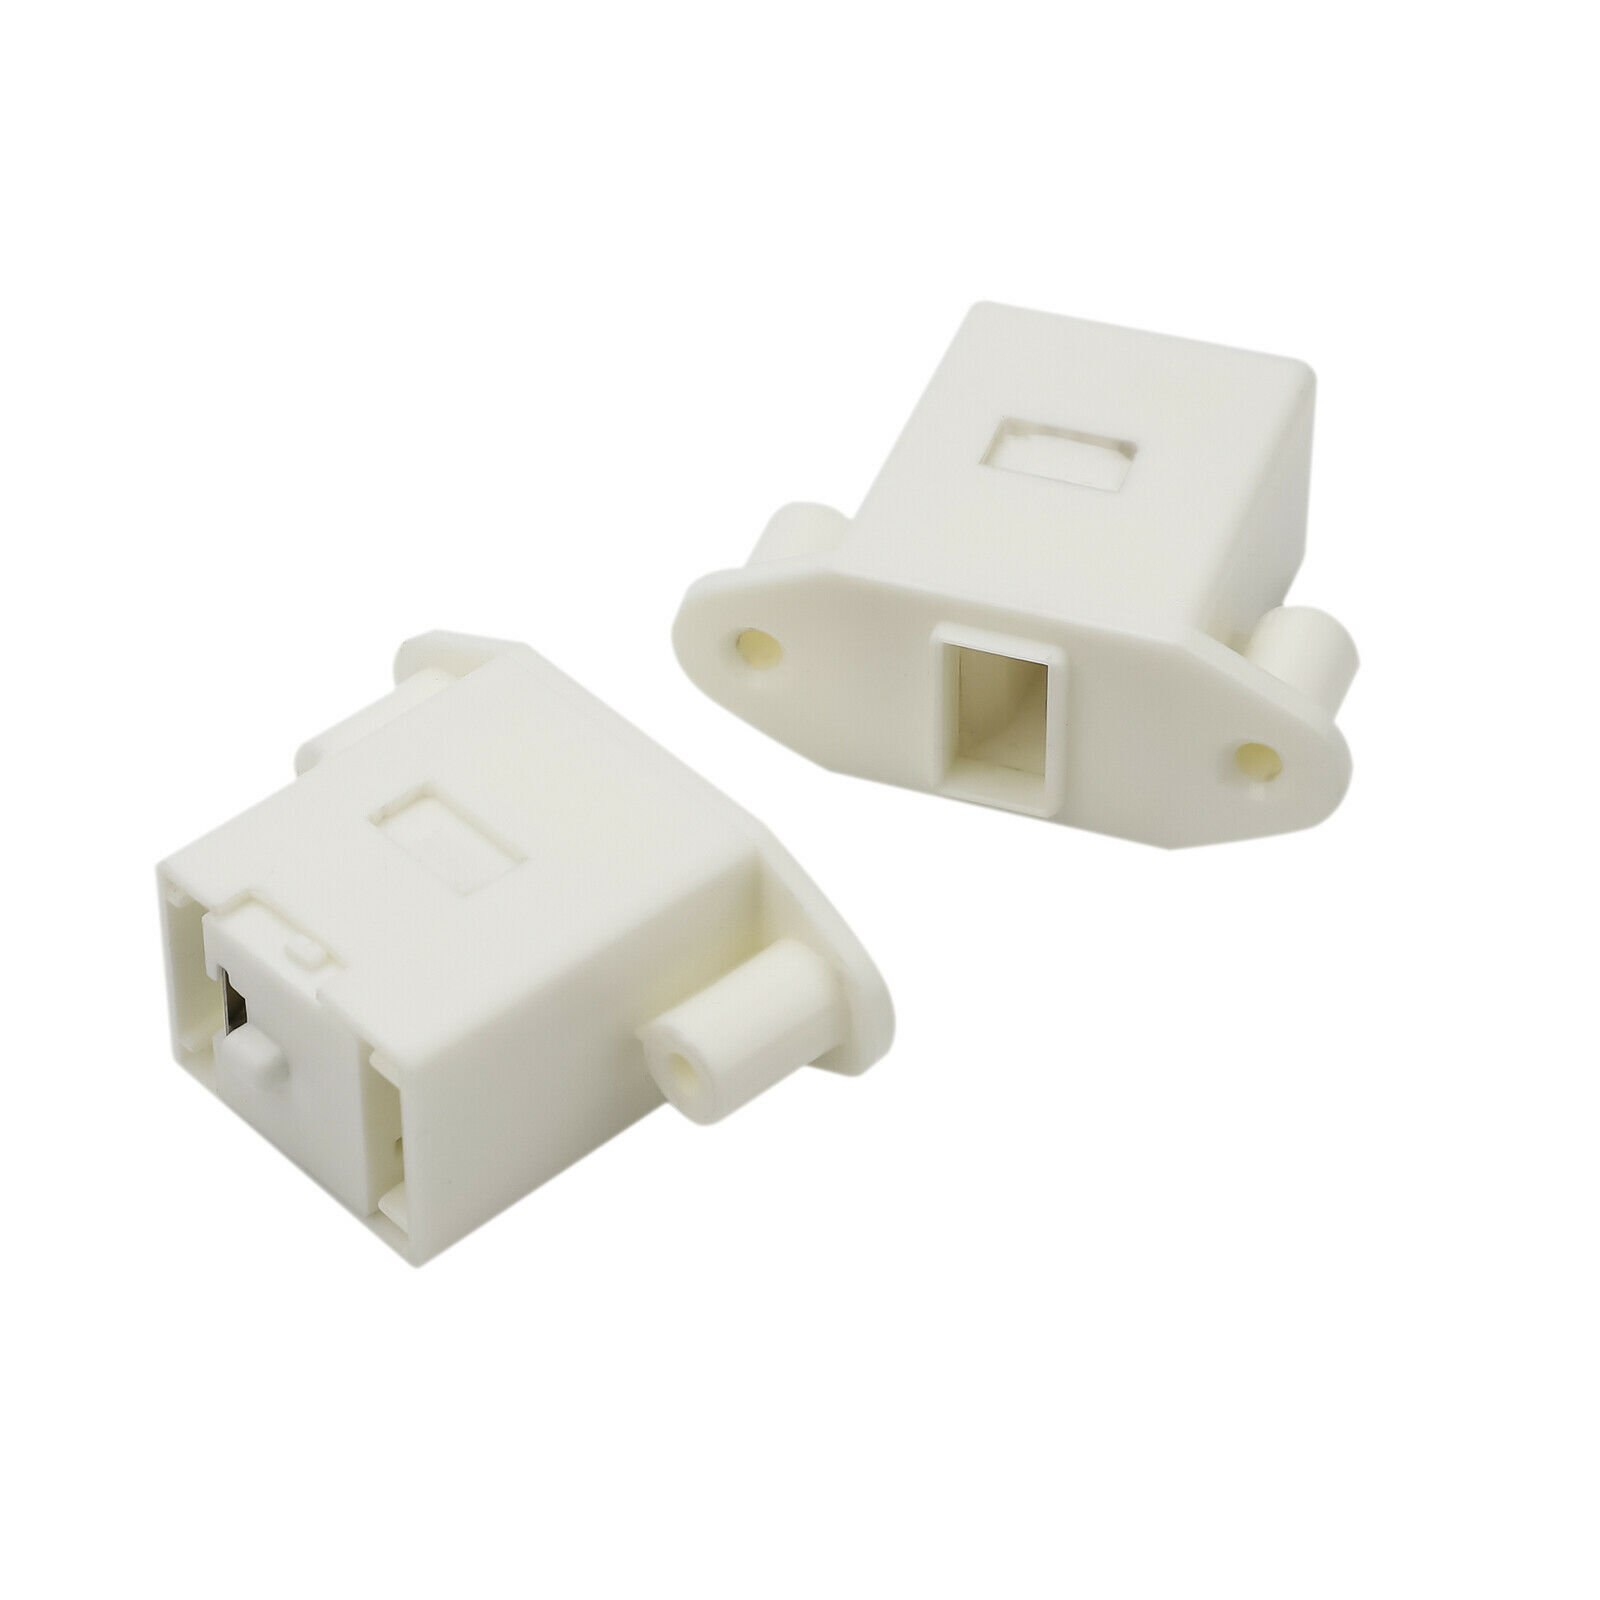 2 Pack 137006200 Washer Door/Drawer Latch for Electrolux & Frigidaire AP4368805, PS2349356, EAP2349356 - image 2 of 9